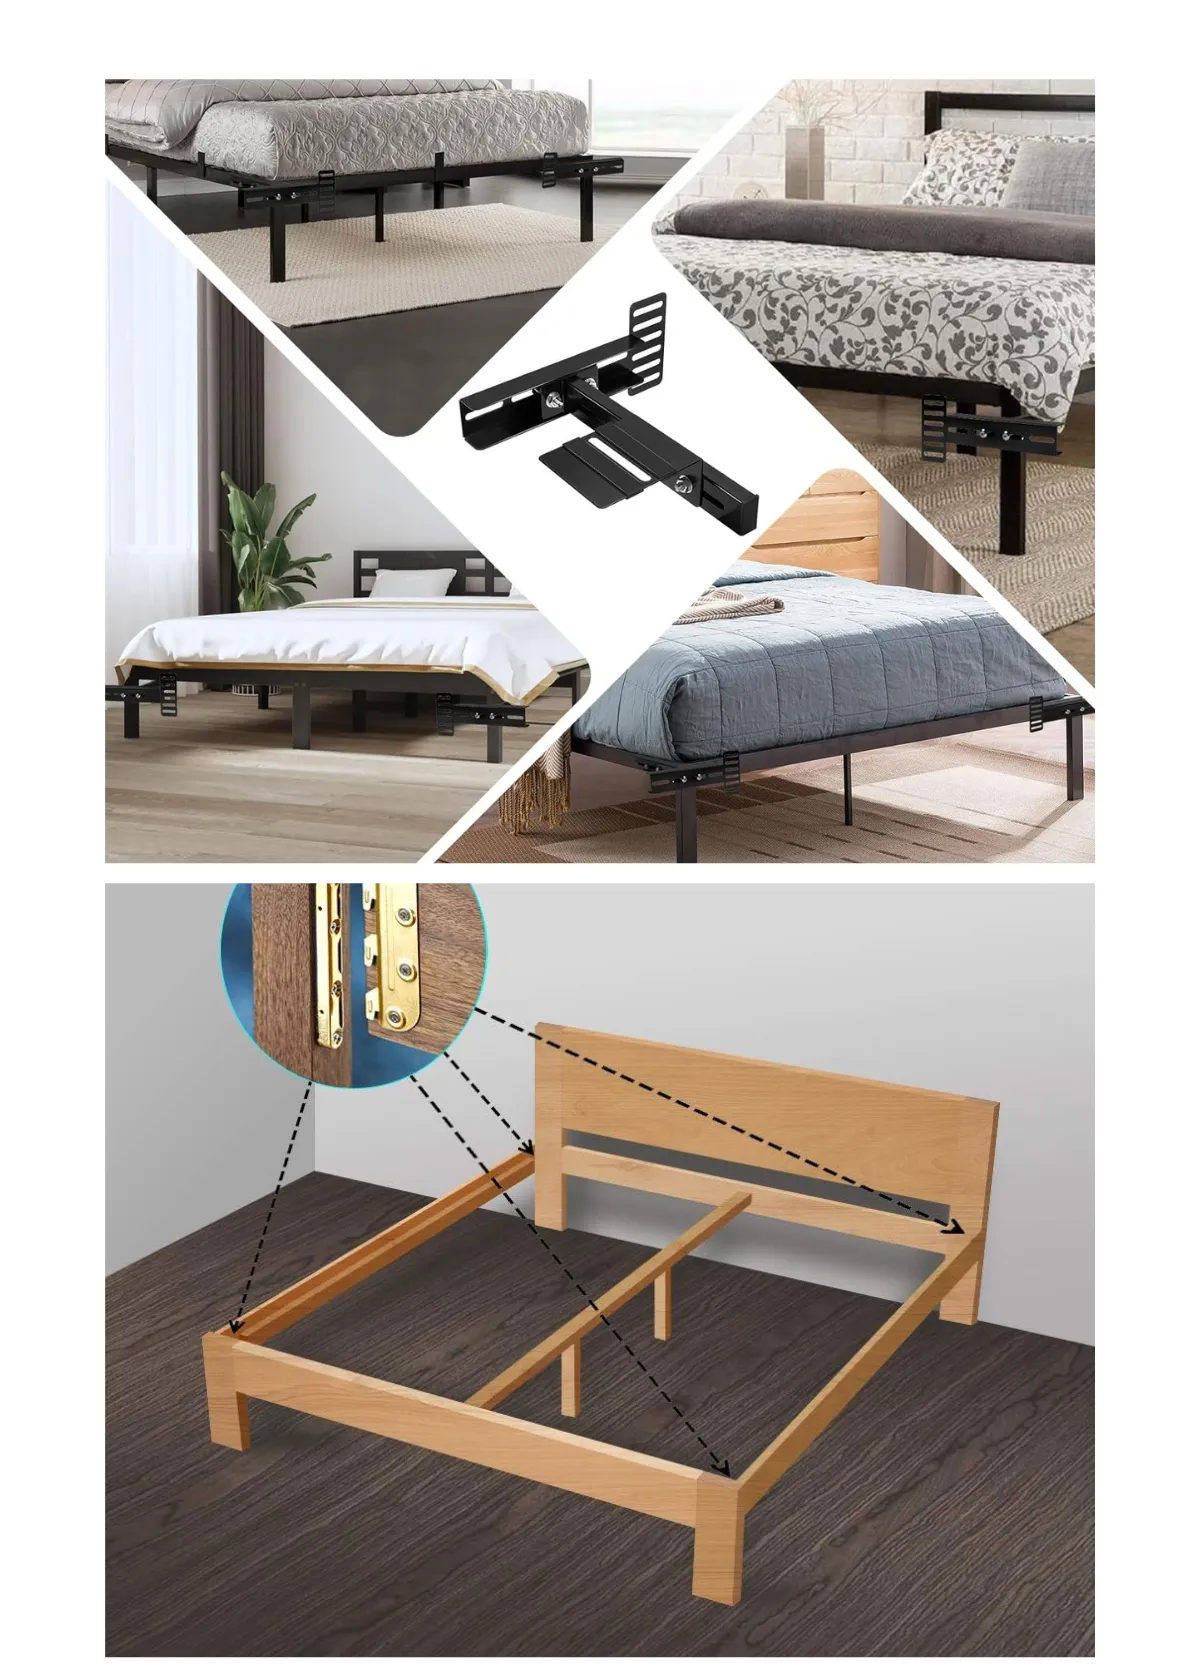 "End Bed Squeaks Forever with the Right Bed Frame Brackets"